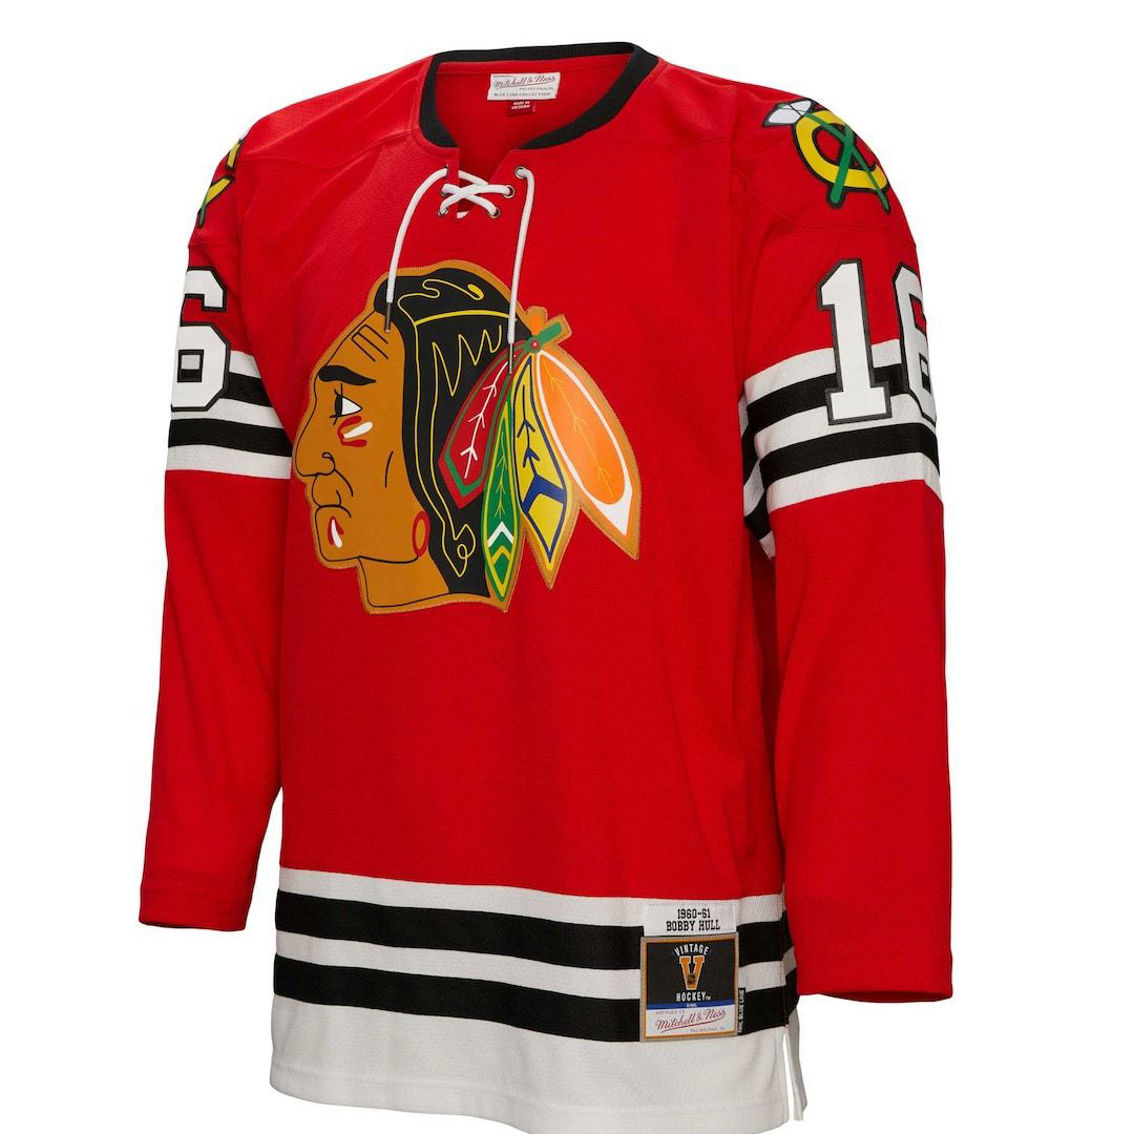 Mitchell & Ness Men's Bobby Hull Red Chicago Blackhawks 1960/61 Blue Line Player Jersey - Image 3 of 4